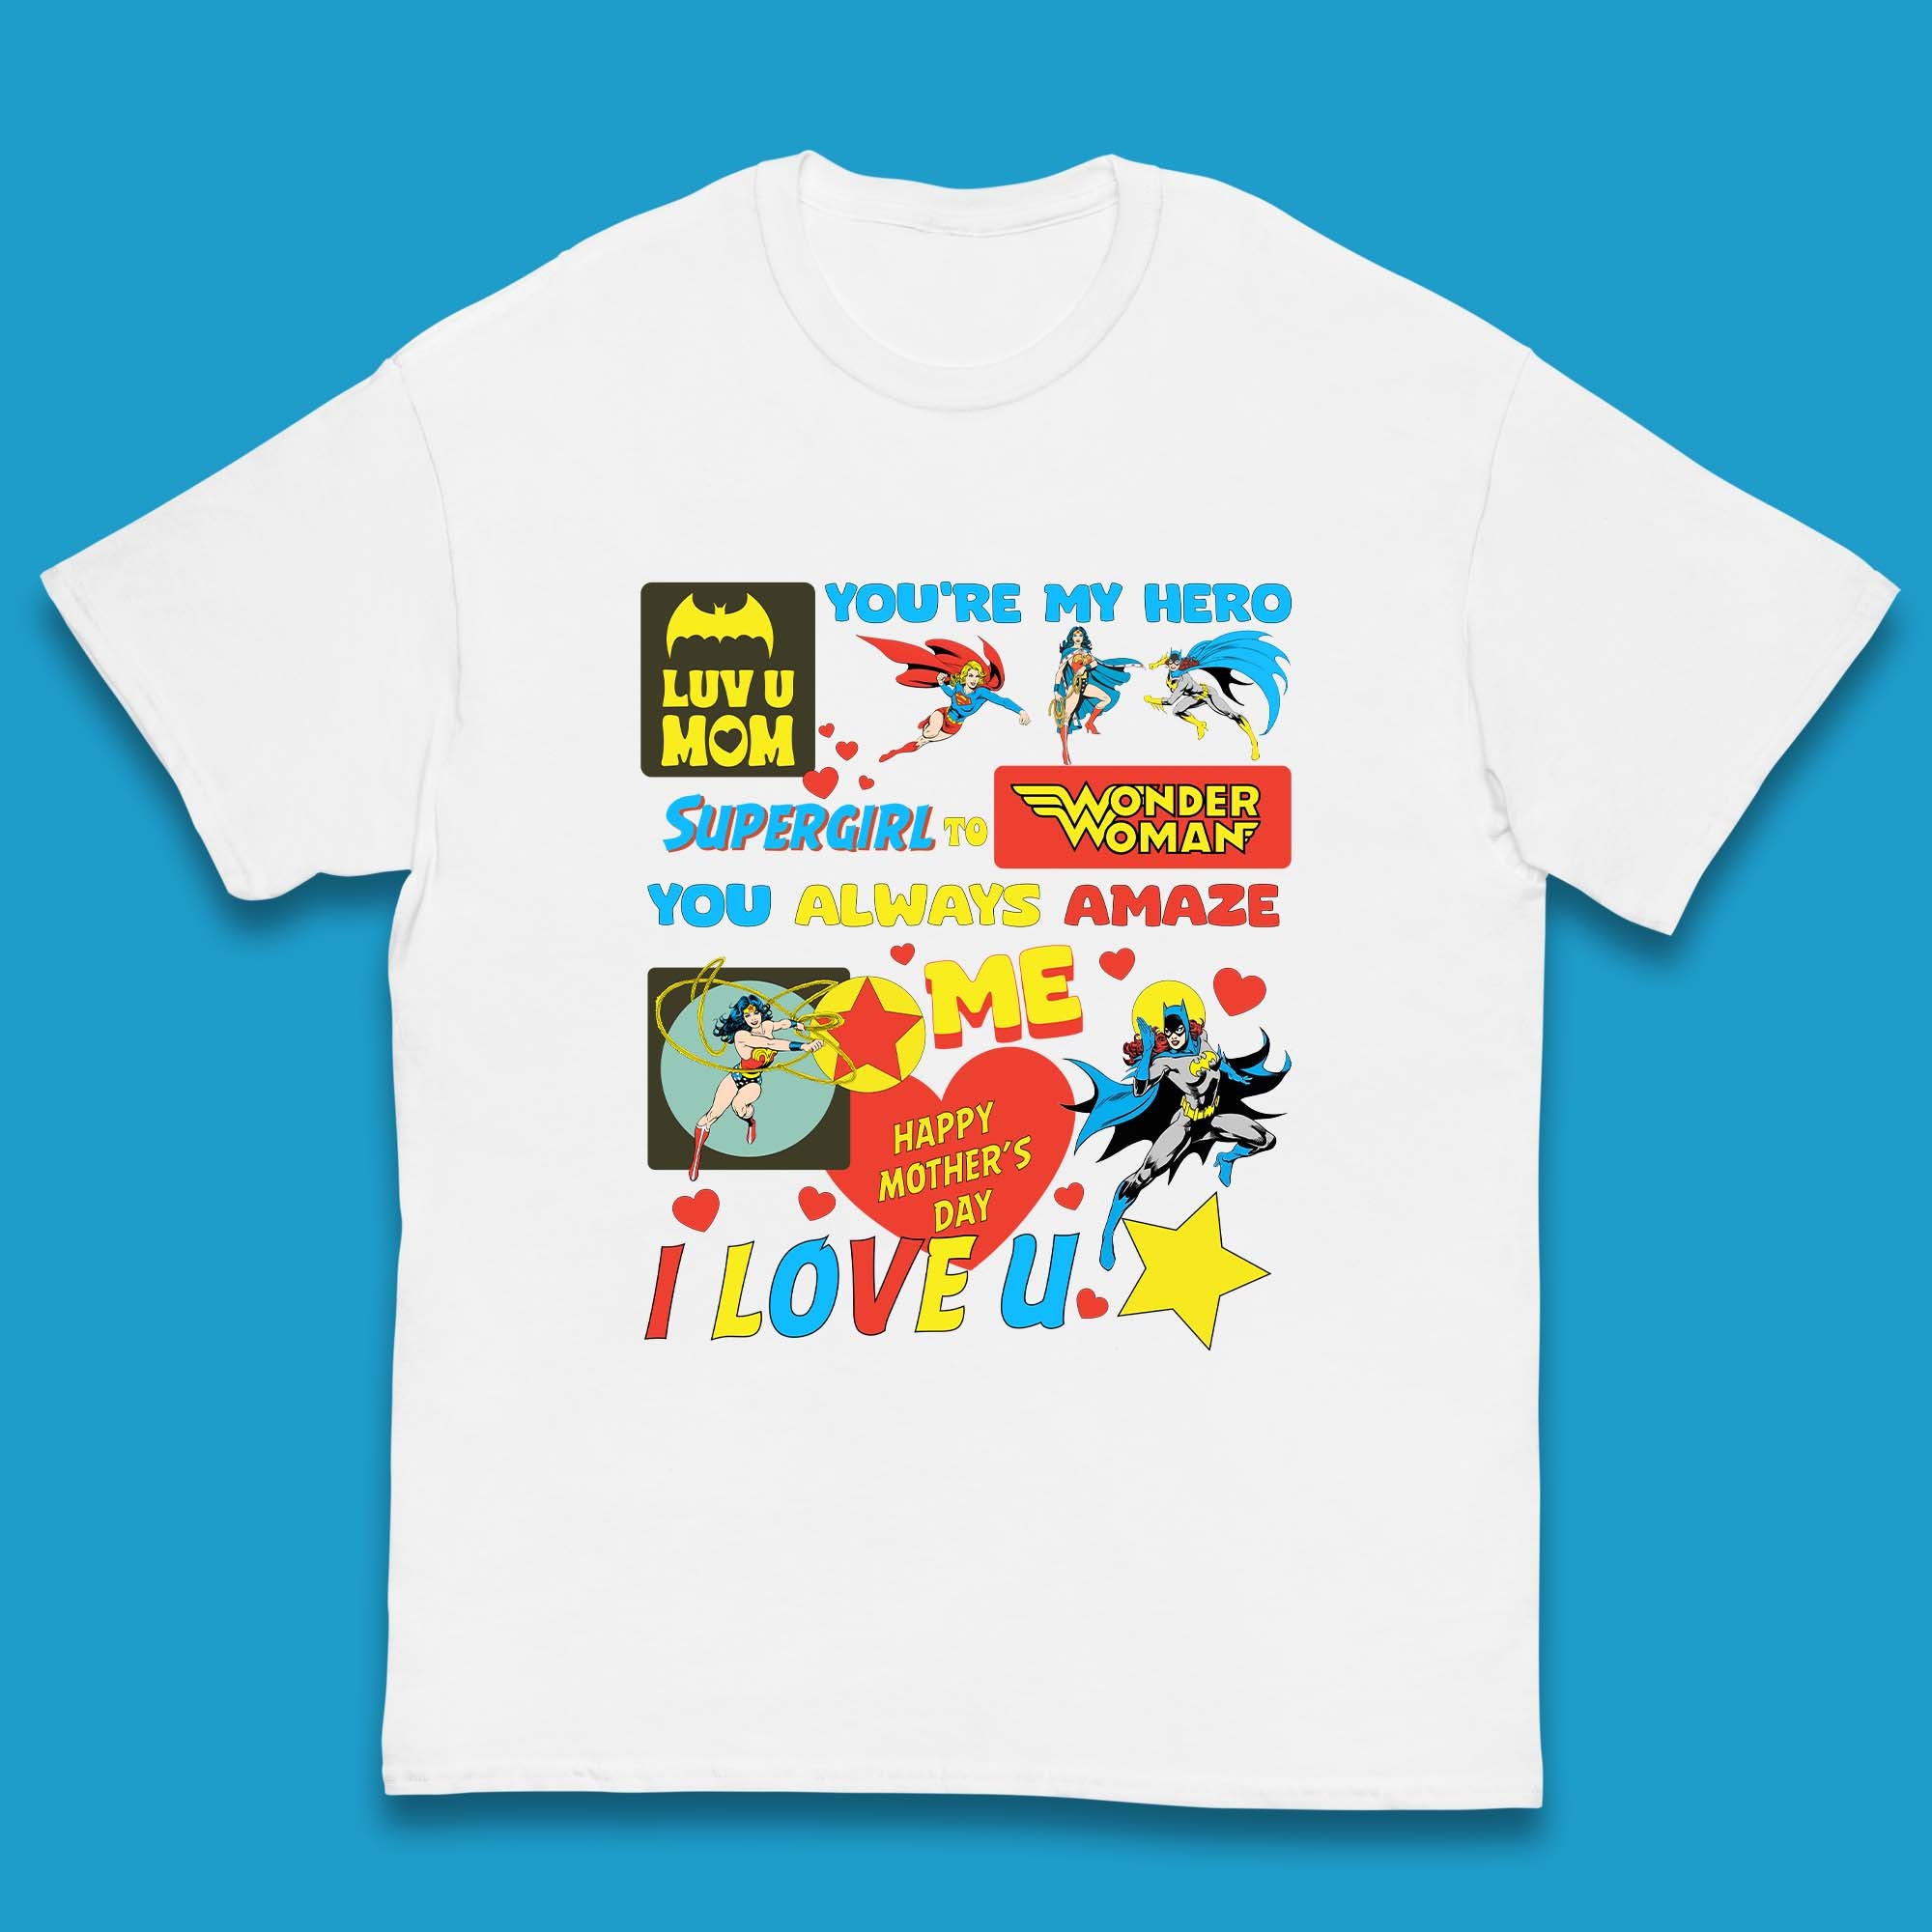 You're My Hero Mother's Day Kids T-Shirt